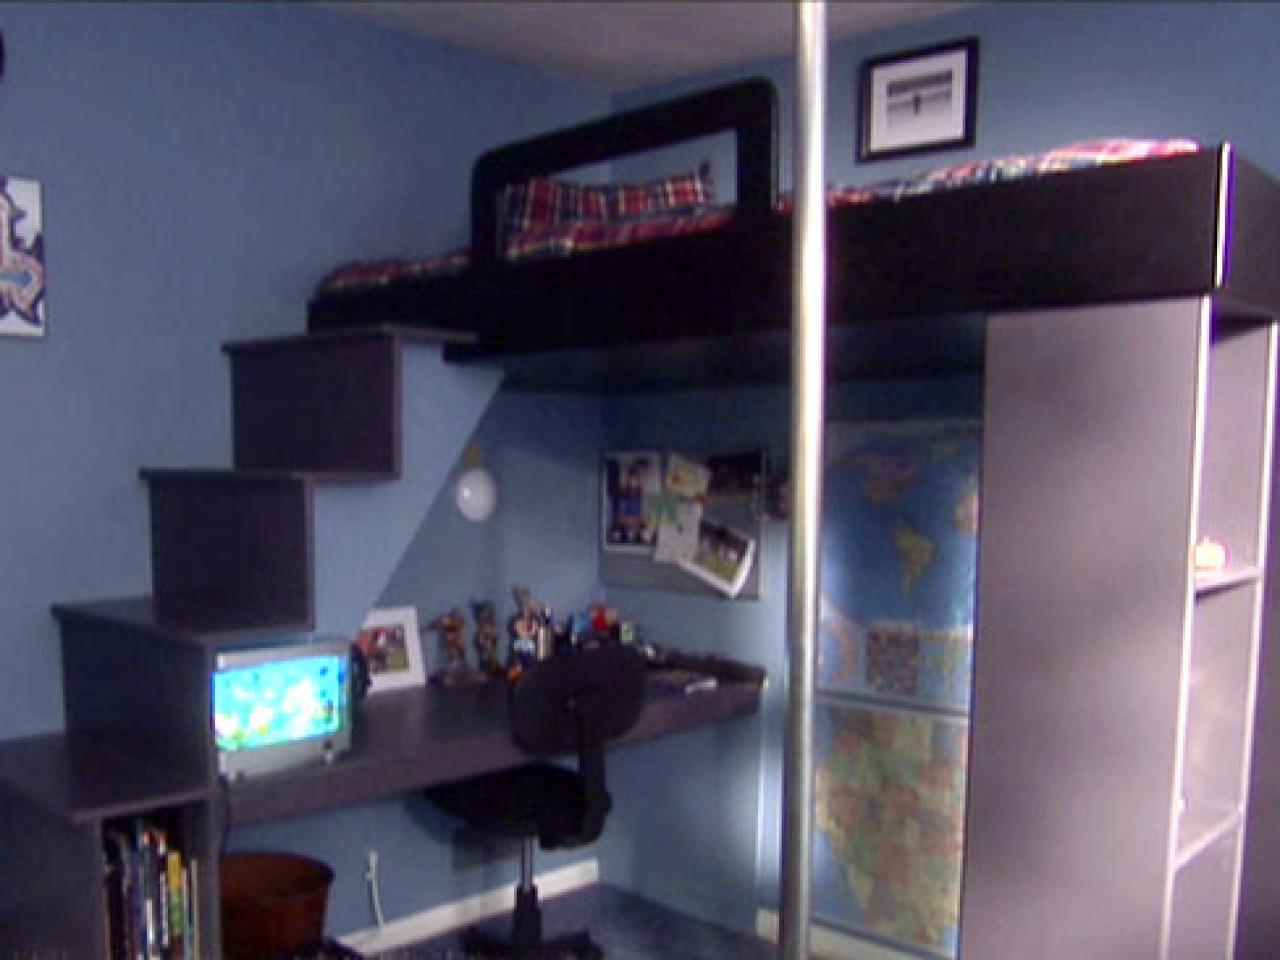 How To Build A Loft Bed With Desk Underneath Bedrooms -&gt; Source